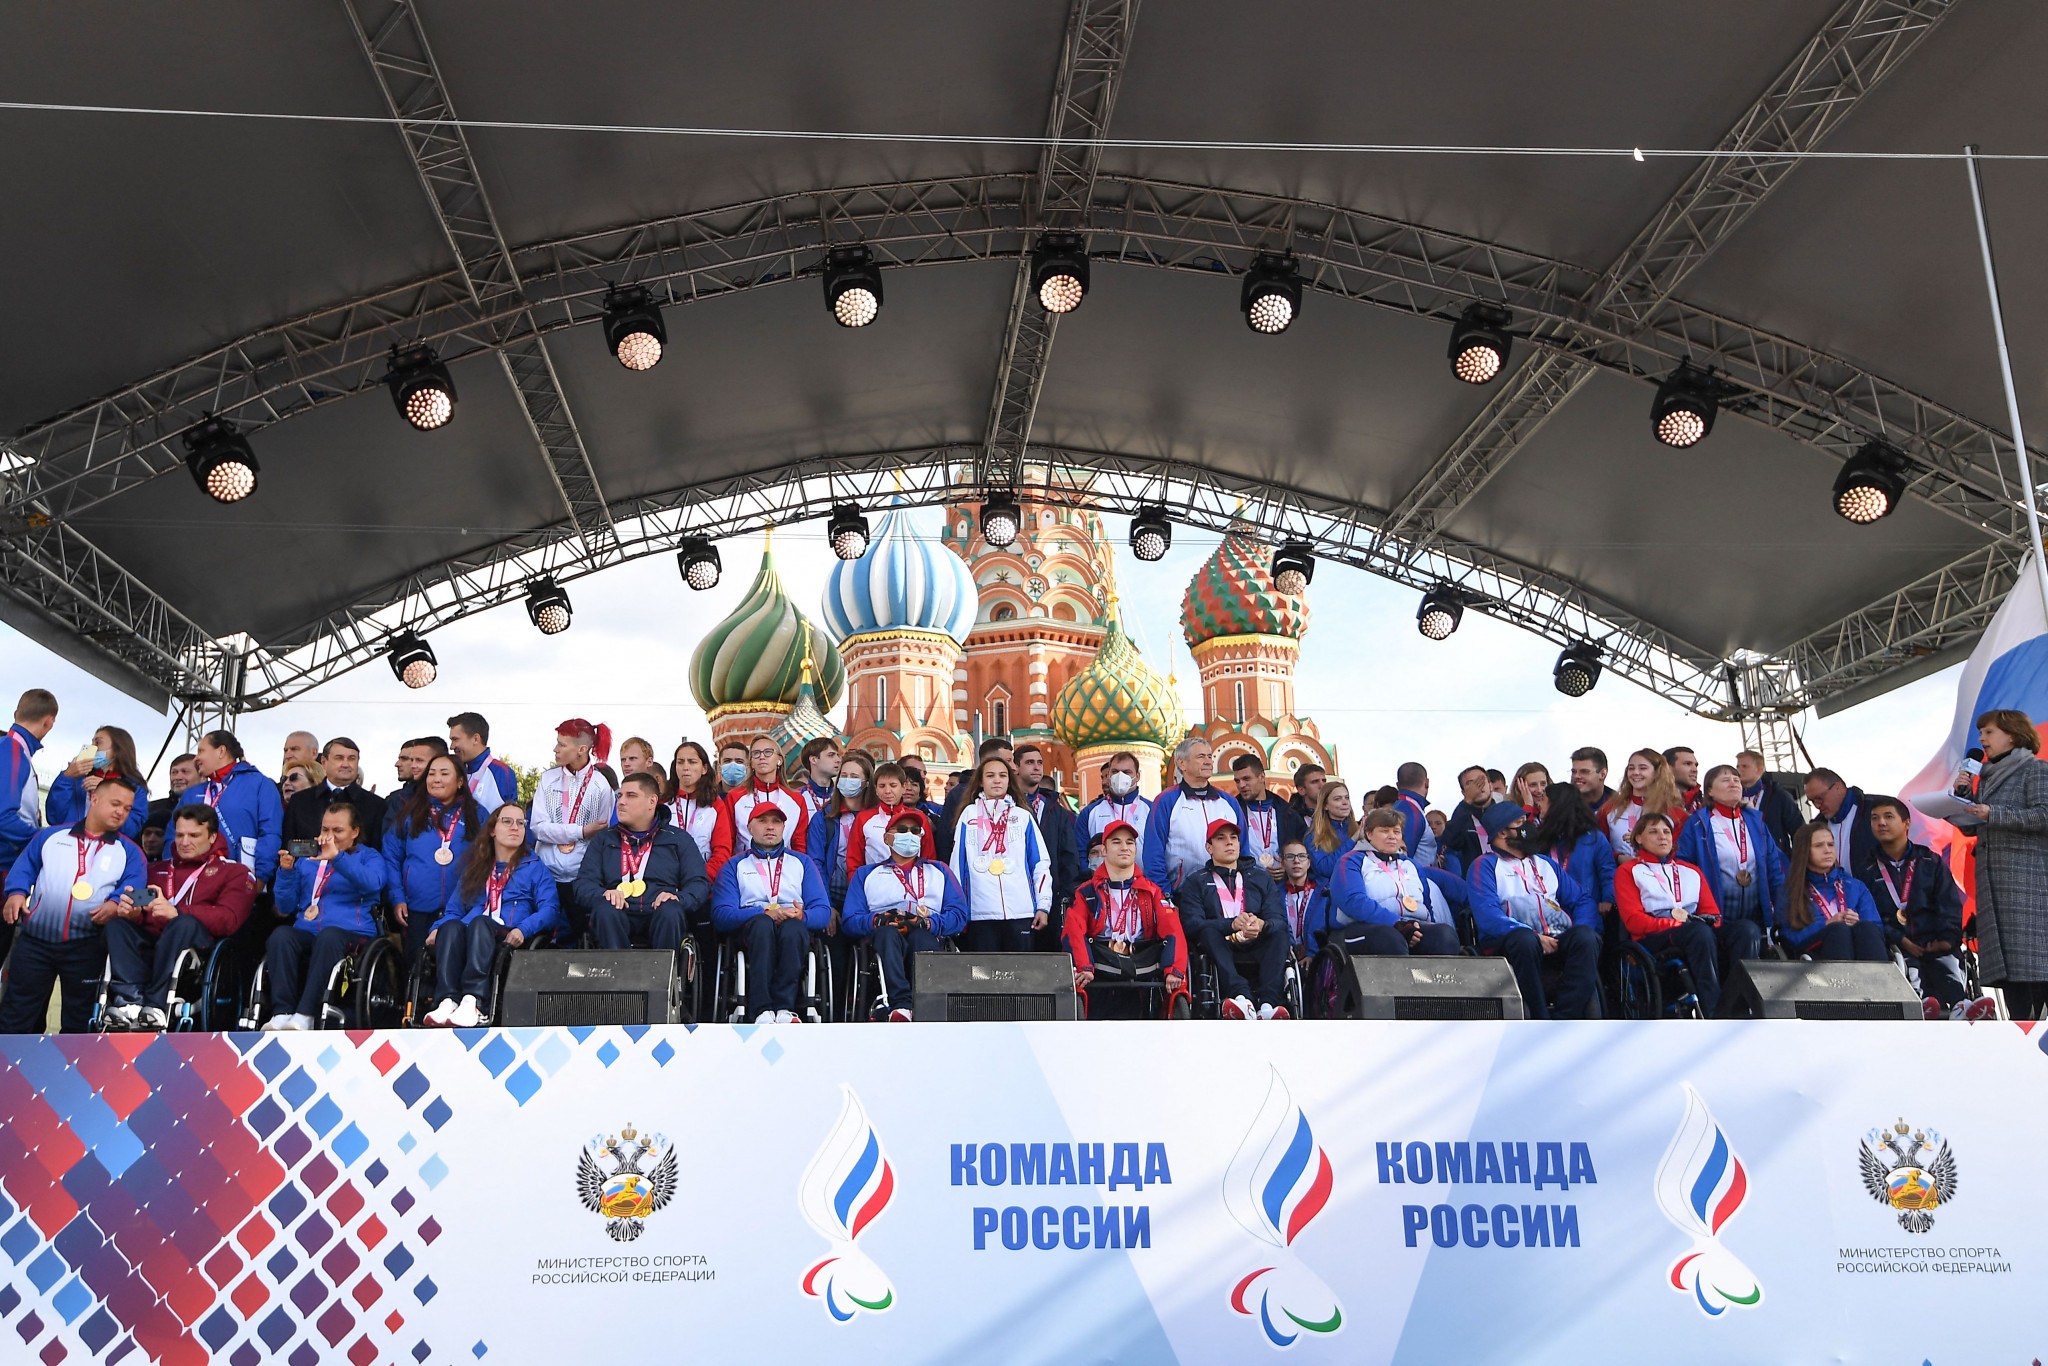 Russian Paralympic Committee claims suspension represents "discrimination"